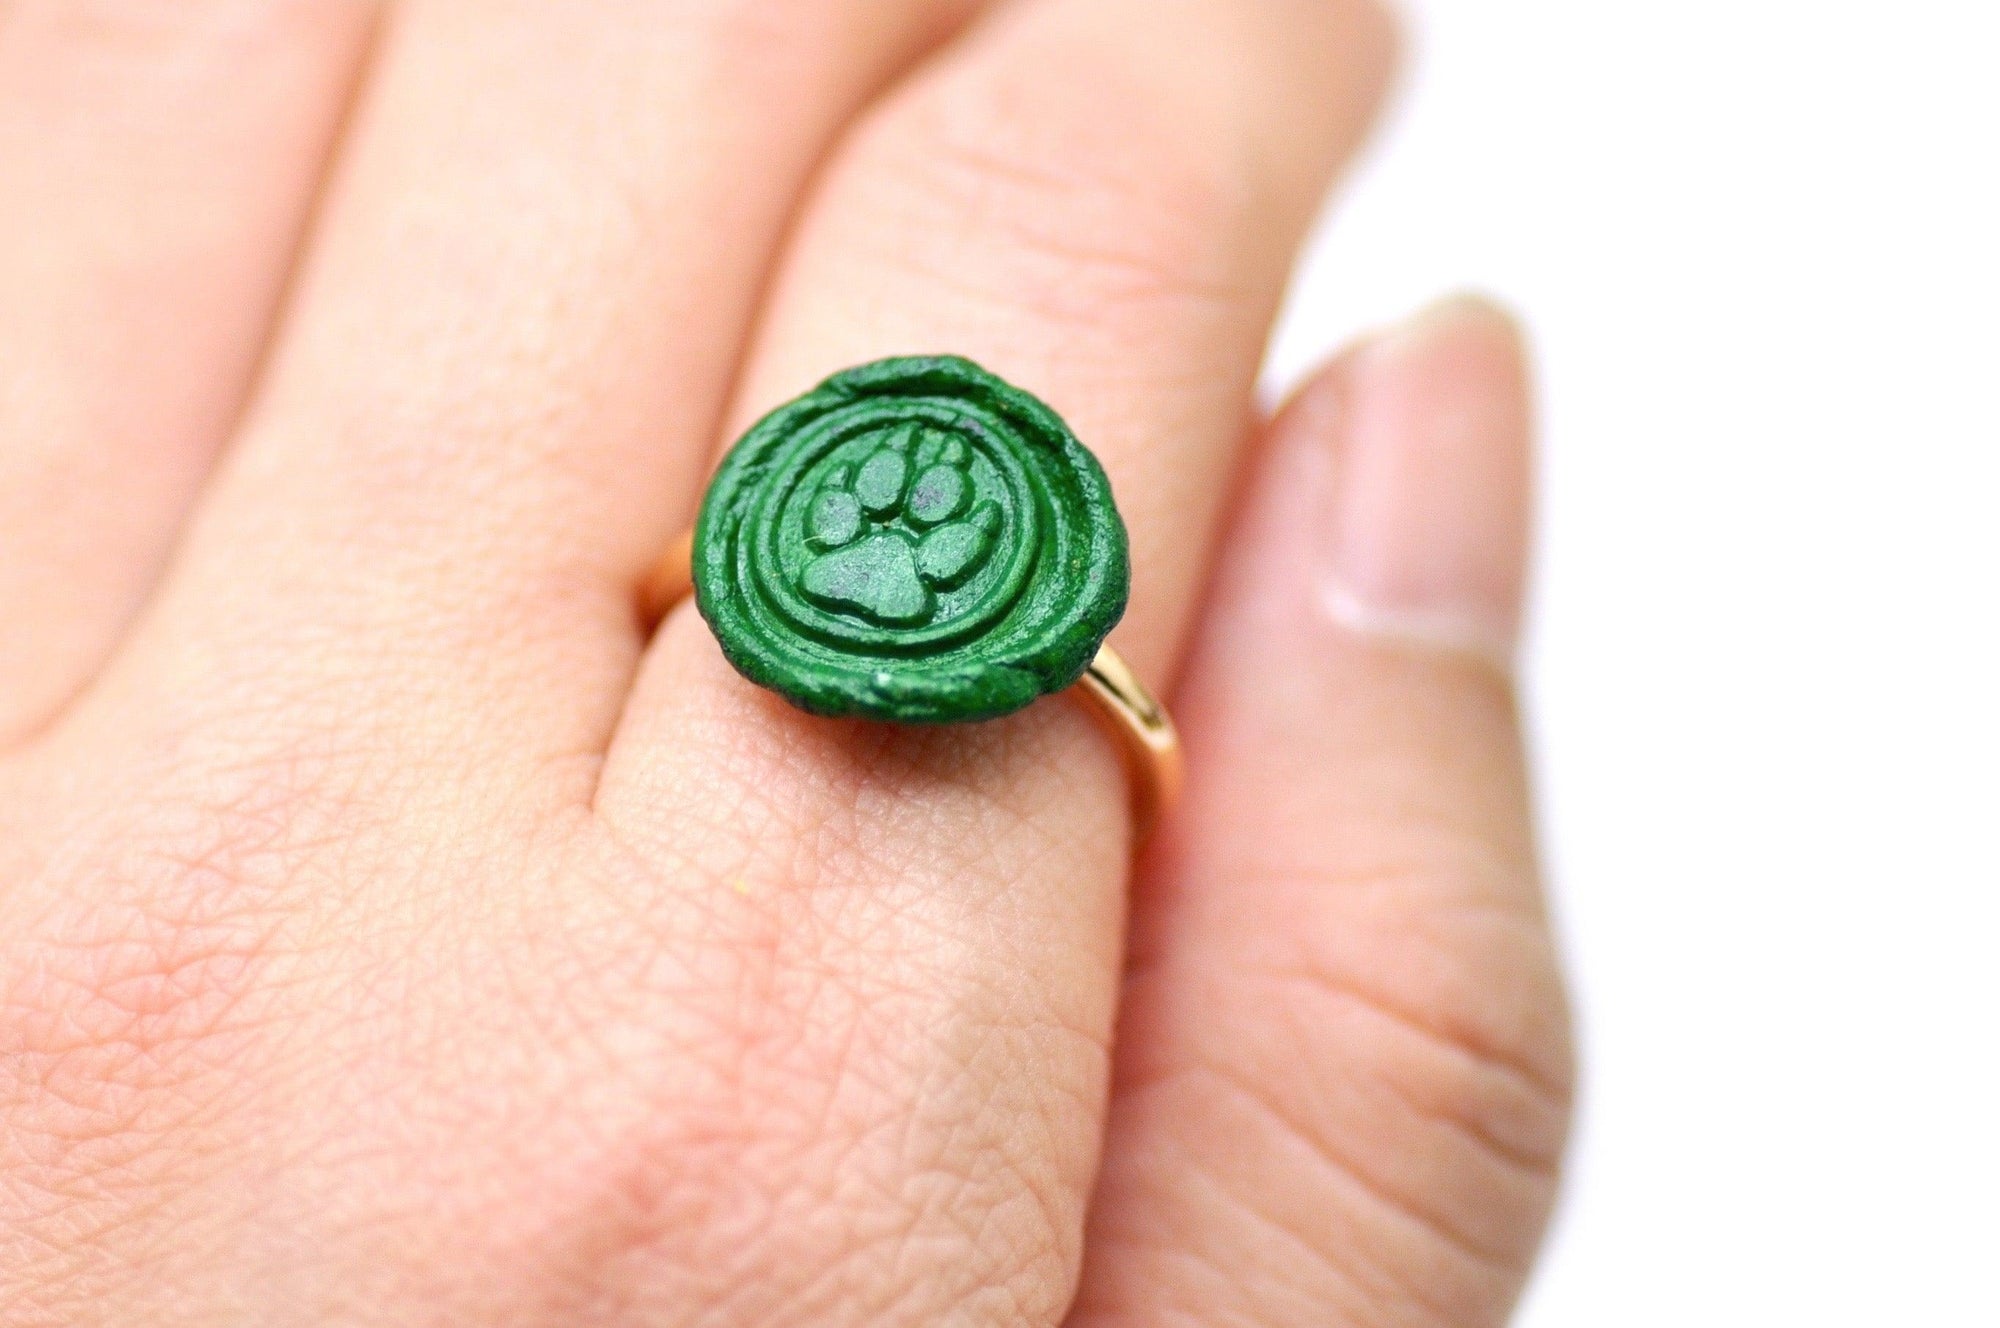 OOAK Paw Wax Seal Ring - Backtozero B20 - Animal Lover, Dog Lover, forest, Green, Handmade, OOAK, ring, size 7